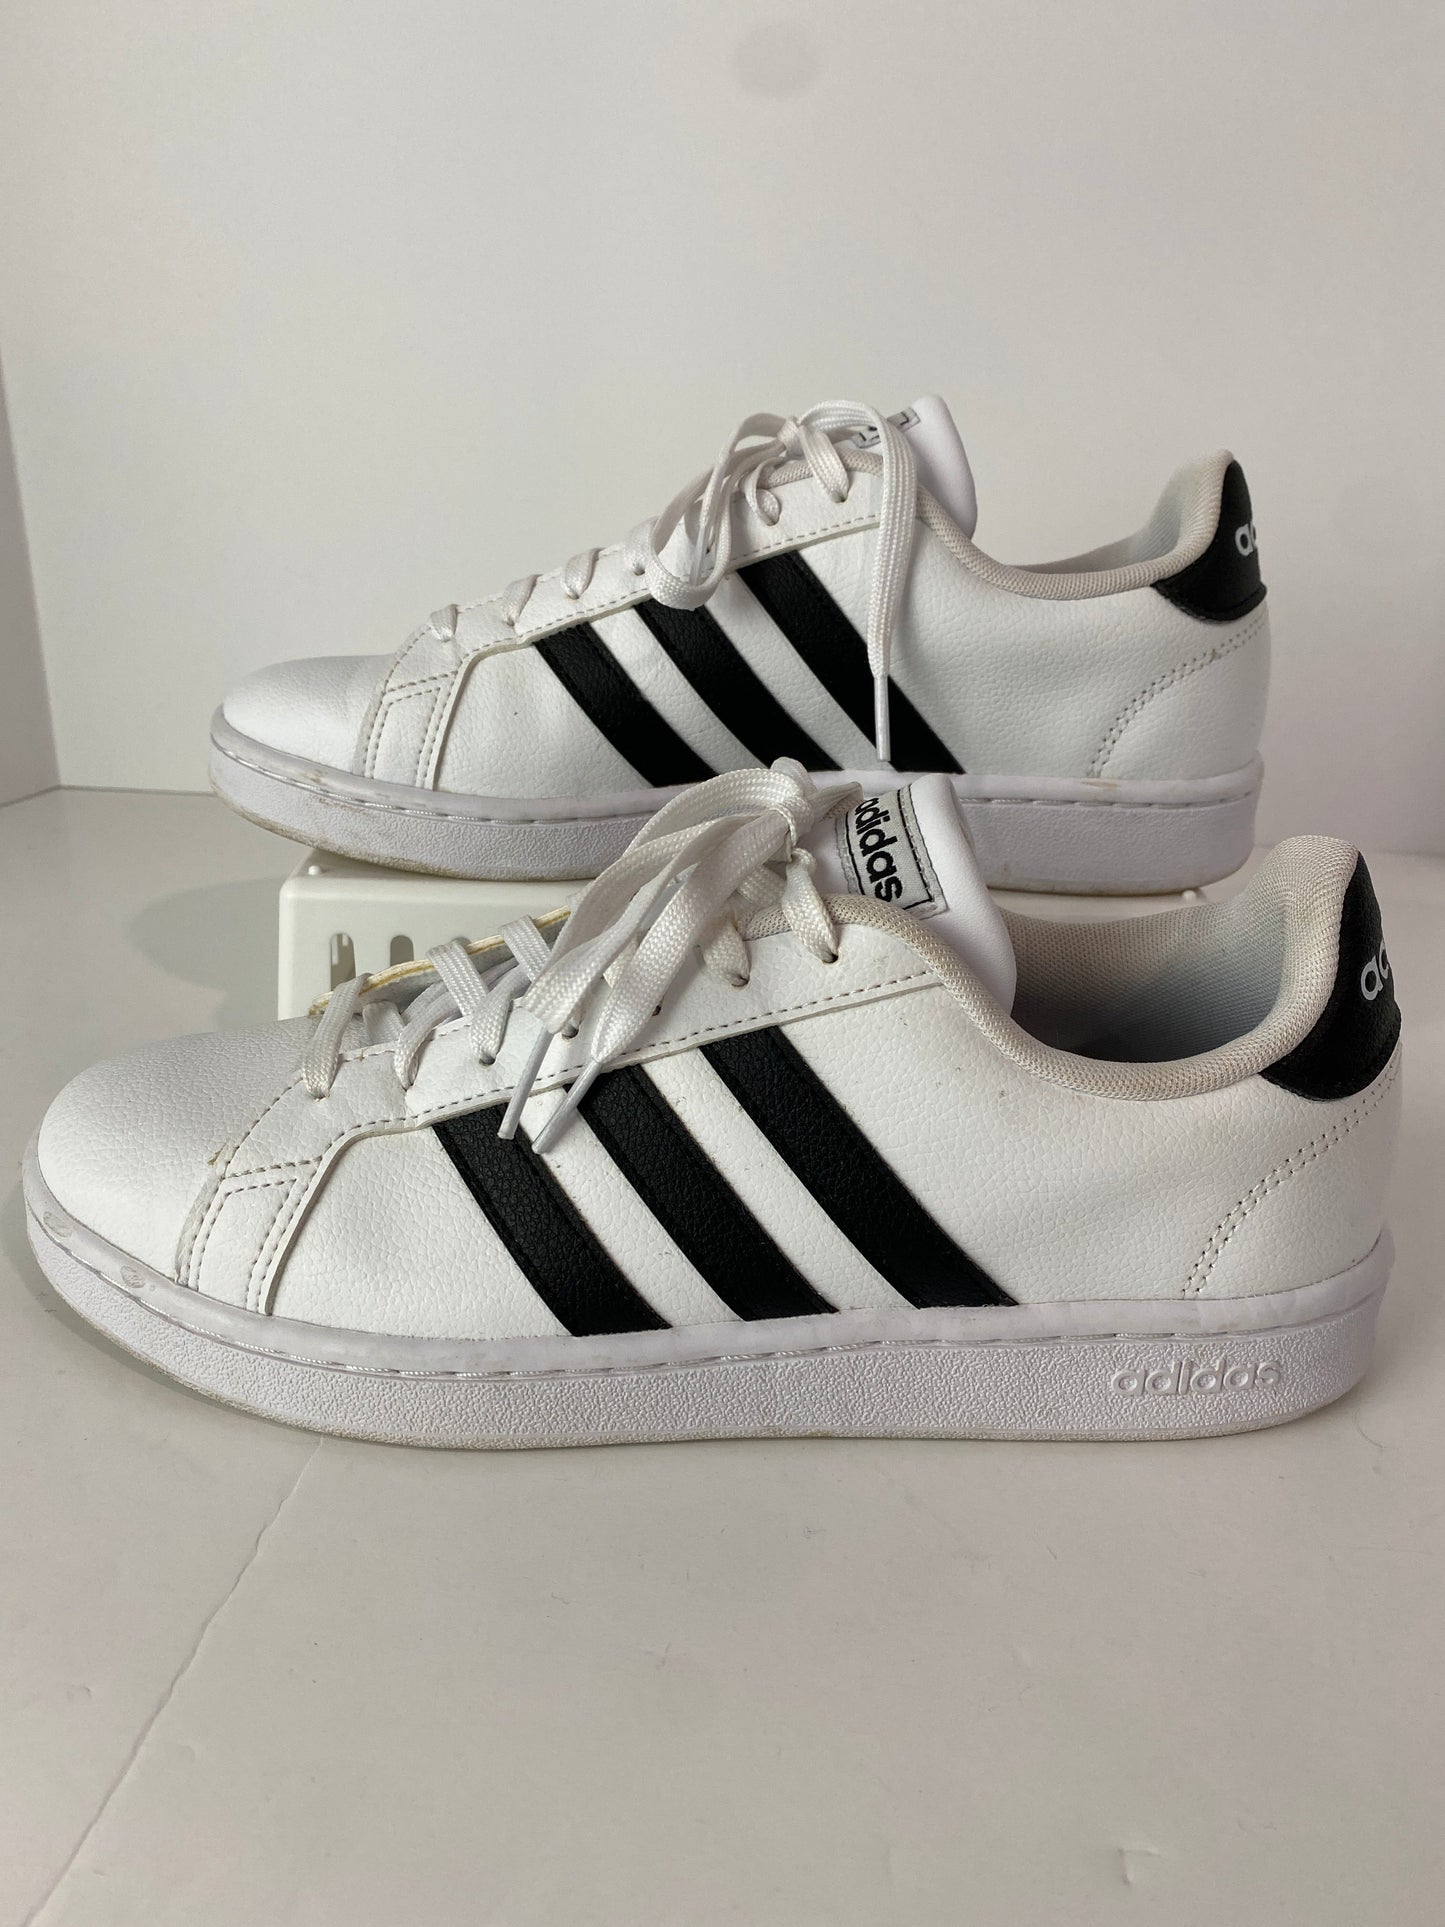 White Shoes Sneakers Adidas, Size 9